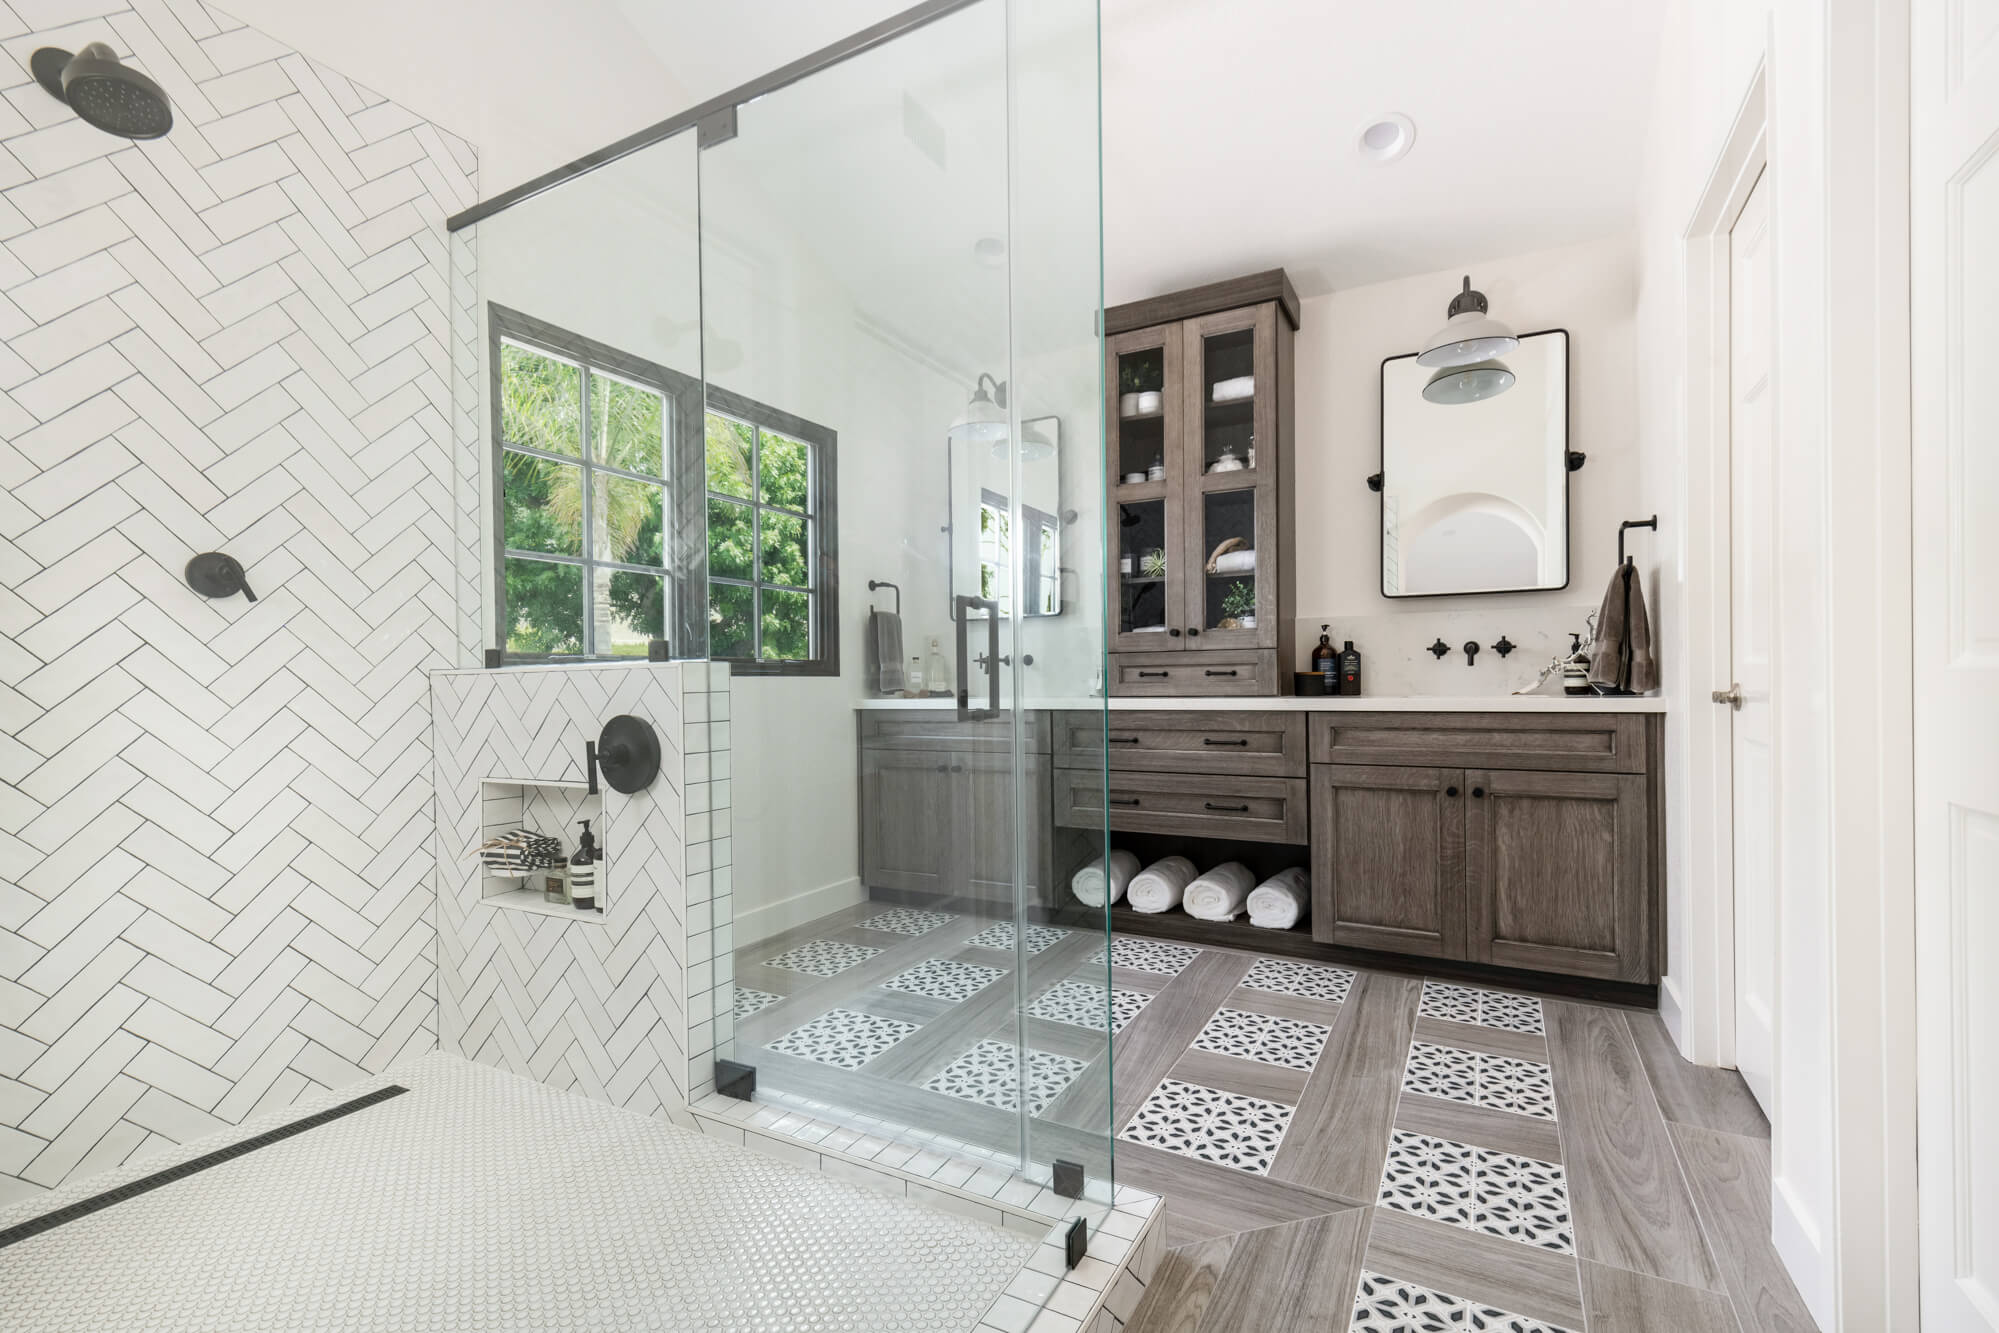 40 Bathroom Tile Ideas For Showers, Floors, And Walls